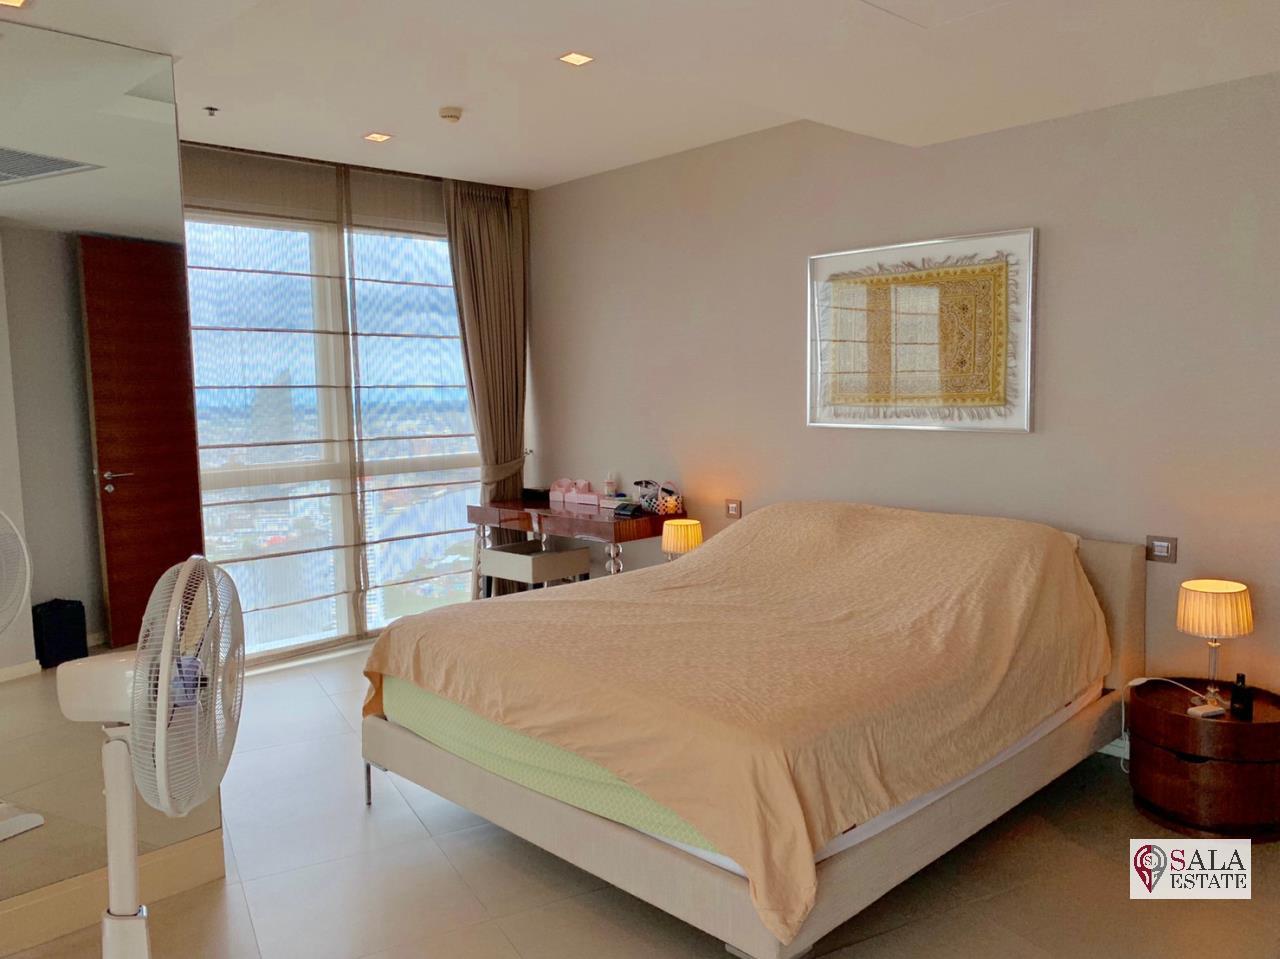 SALA ESTATE Agency's ( FOR SALE ) THE RIVER – RIVERSIDE , ICONSIAM ,232 SQM 2 BEDROOMS 3 BATHROOMS 2 LIVING ROOMS, FULLY FURNISHED,RIVER VIEW 5